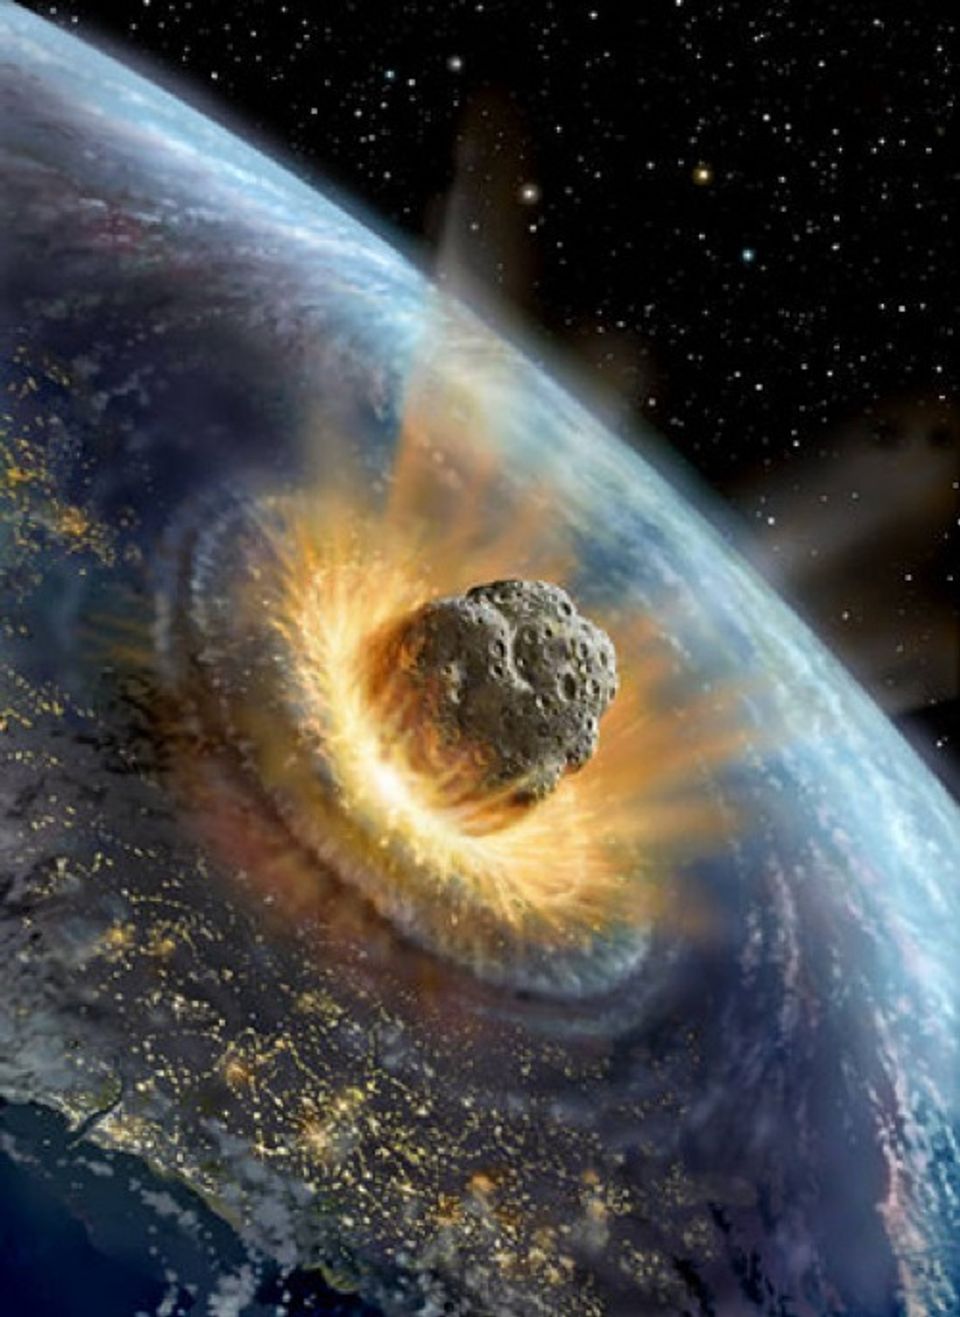 Asteroid could strike Earth in 2036, according to Russian scientists